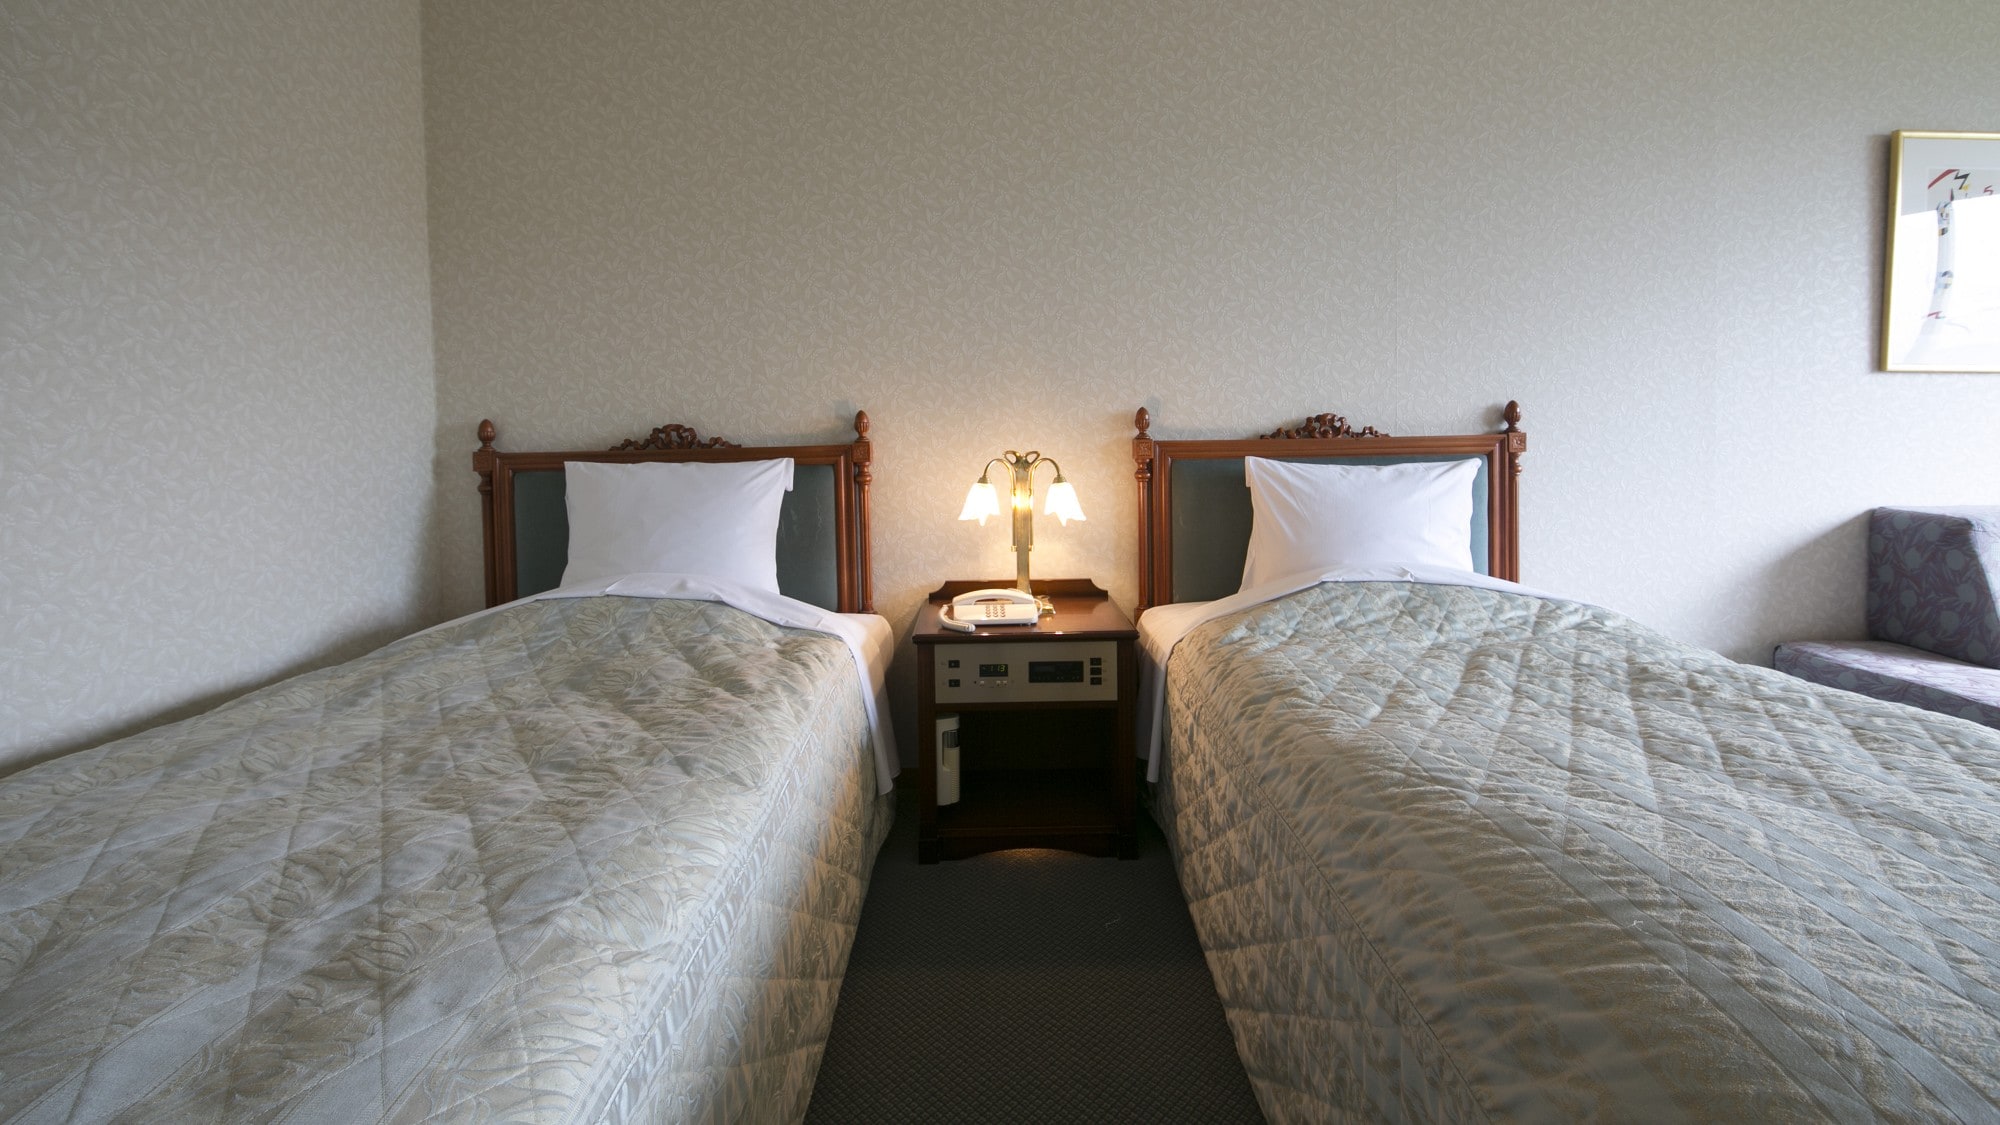 [Standard Twin] A maximum of 4 people can be accommodated by putting 2 extra beds in 2 basic beds.